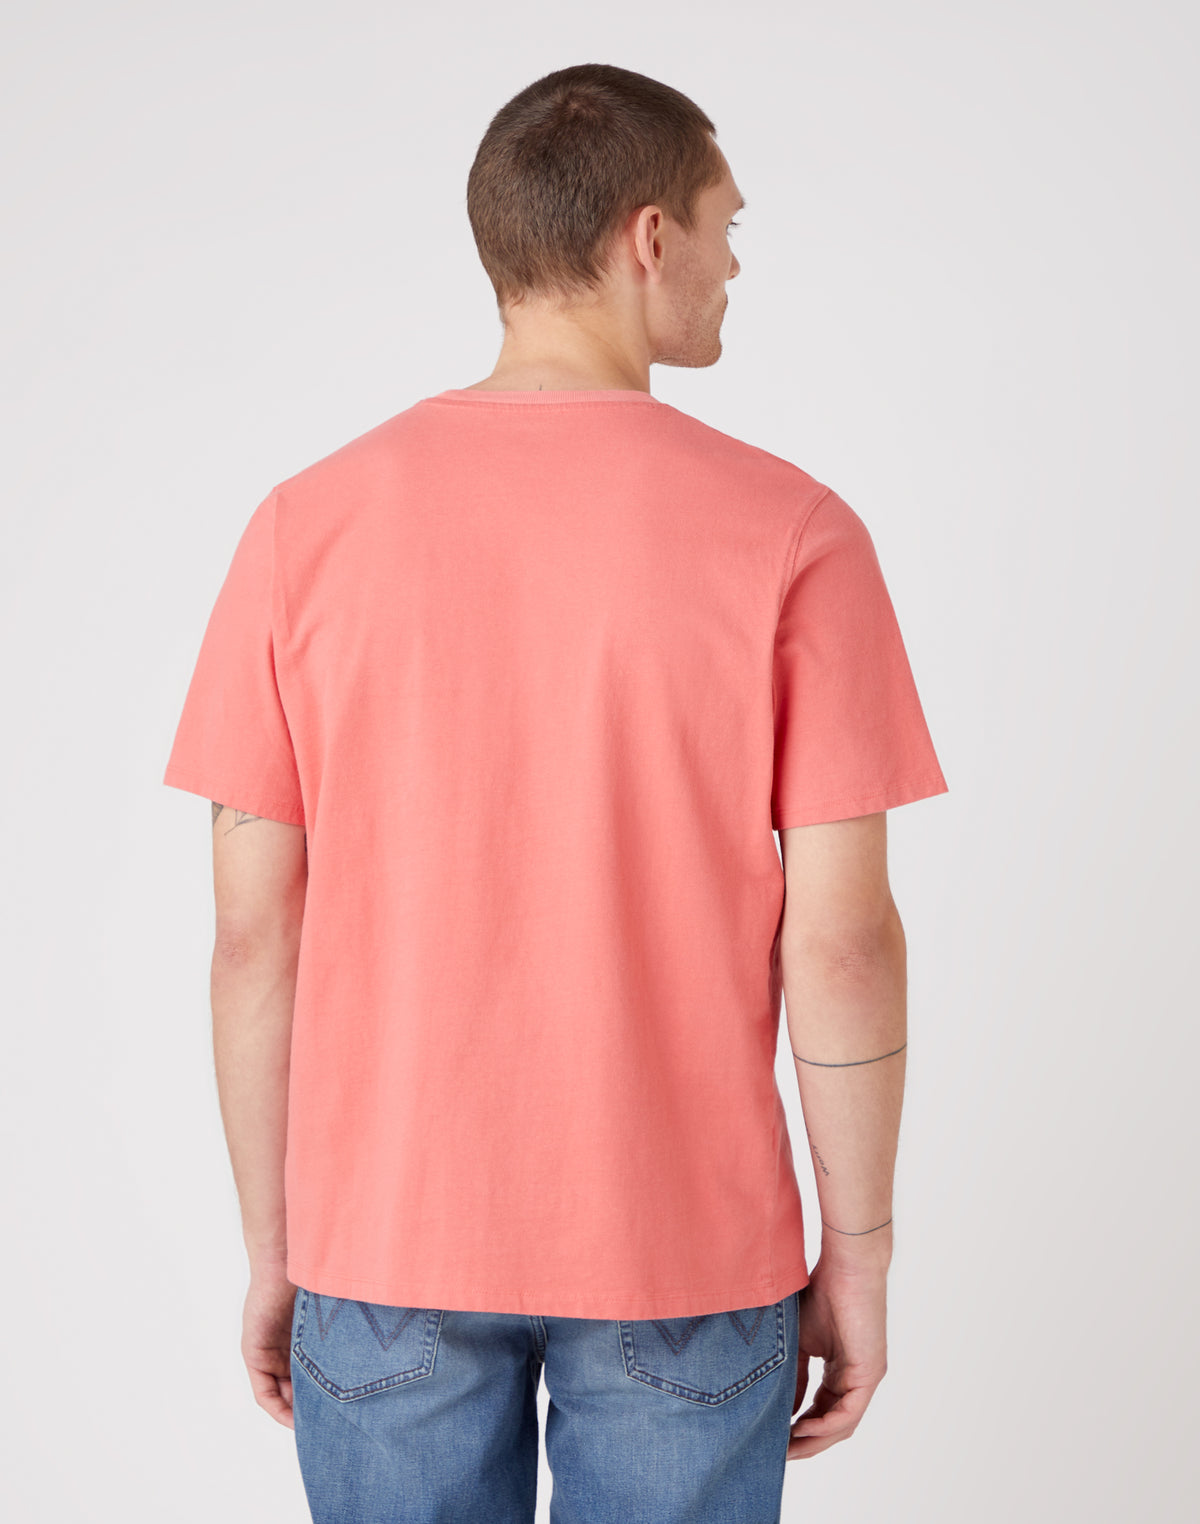 Collegiate T-Shirt in Spiced Coral